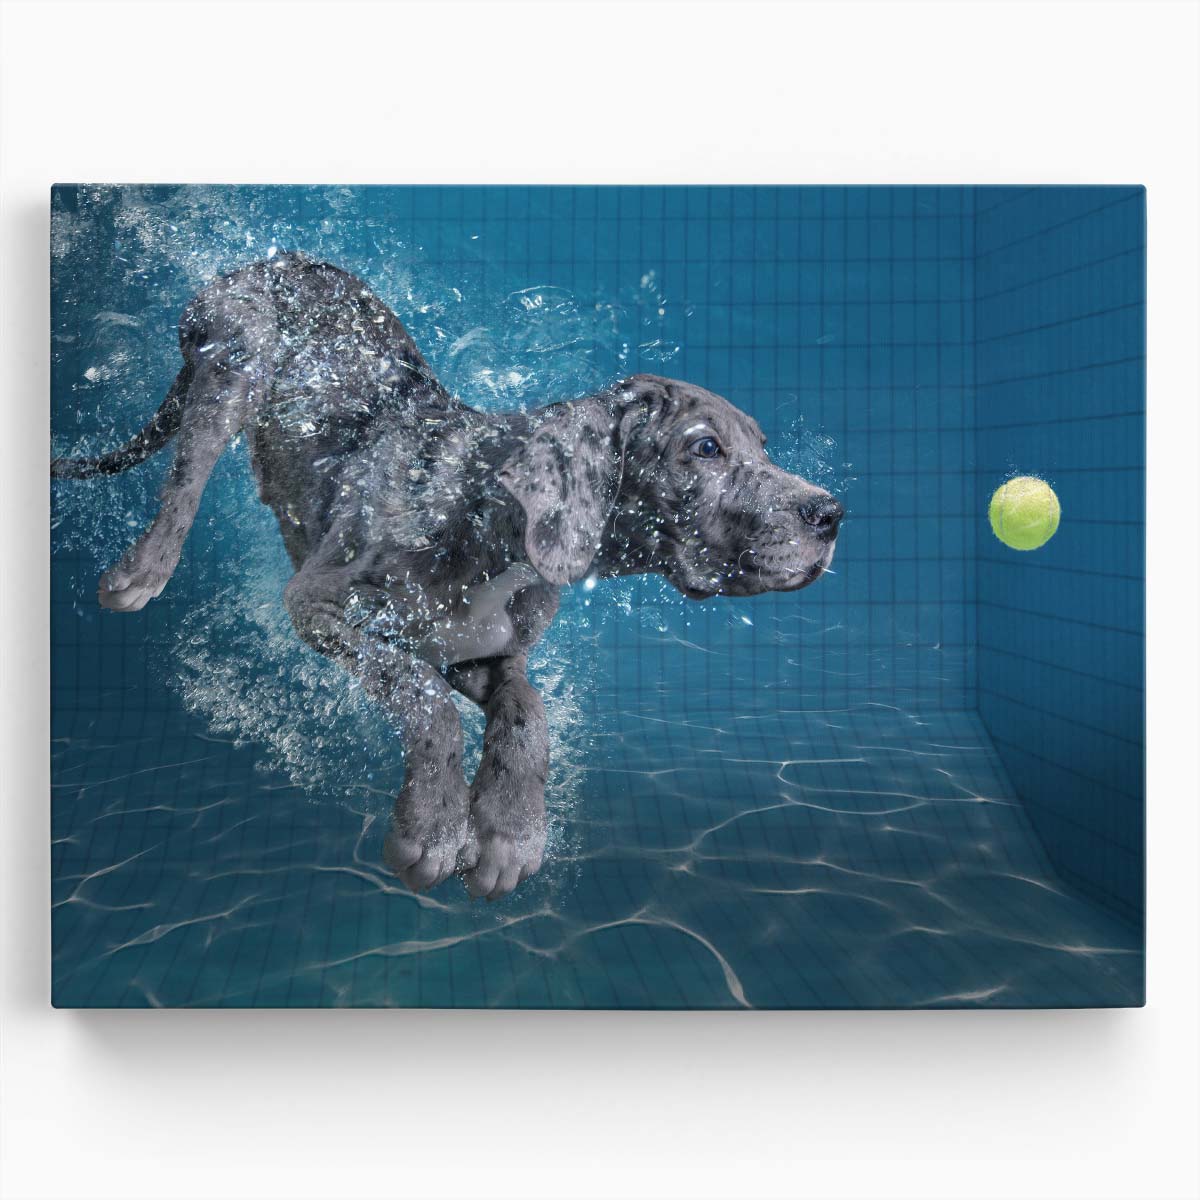 Underwater Dog Chasing Tennis Ball - Humorous Pet Photography Wall Art by Luxuriance Designs. Made in USA.